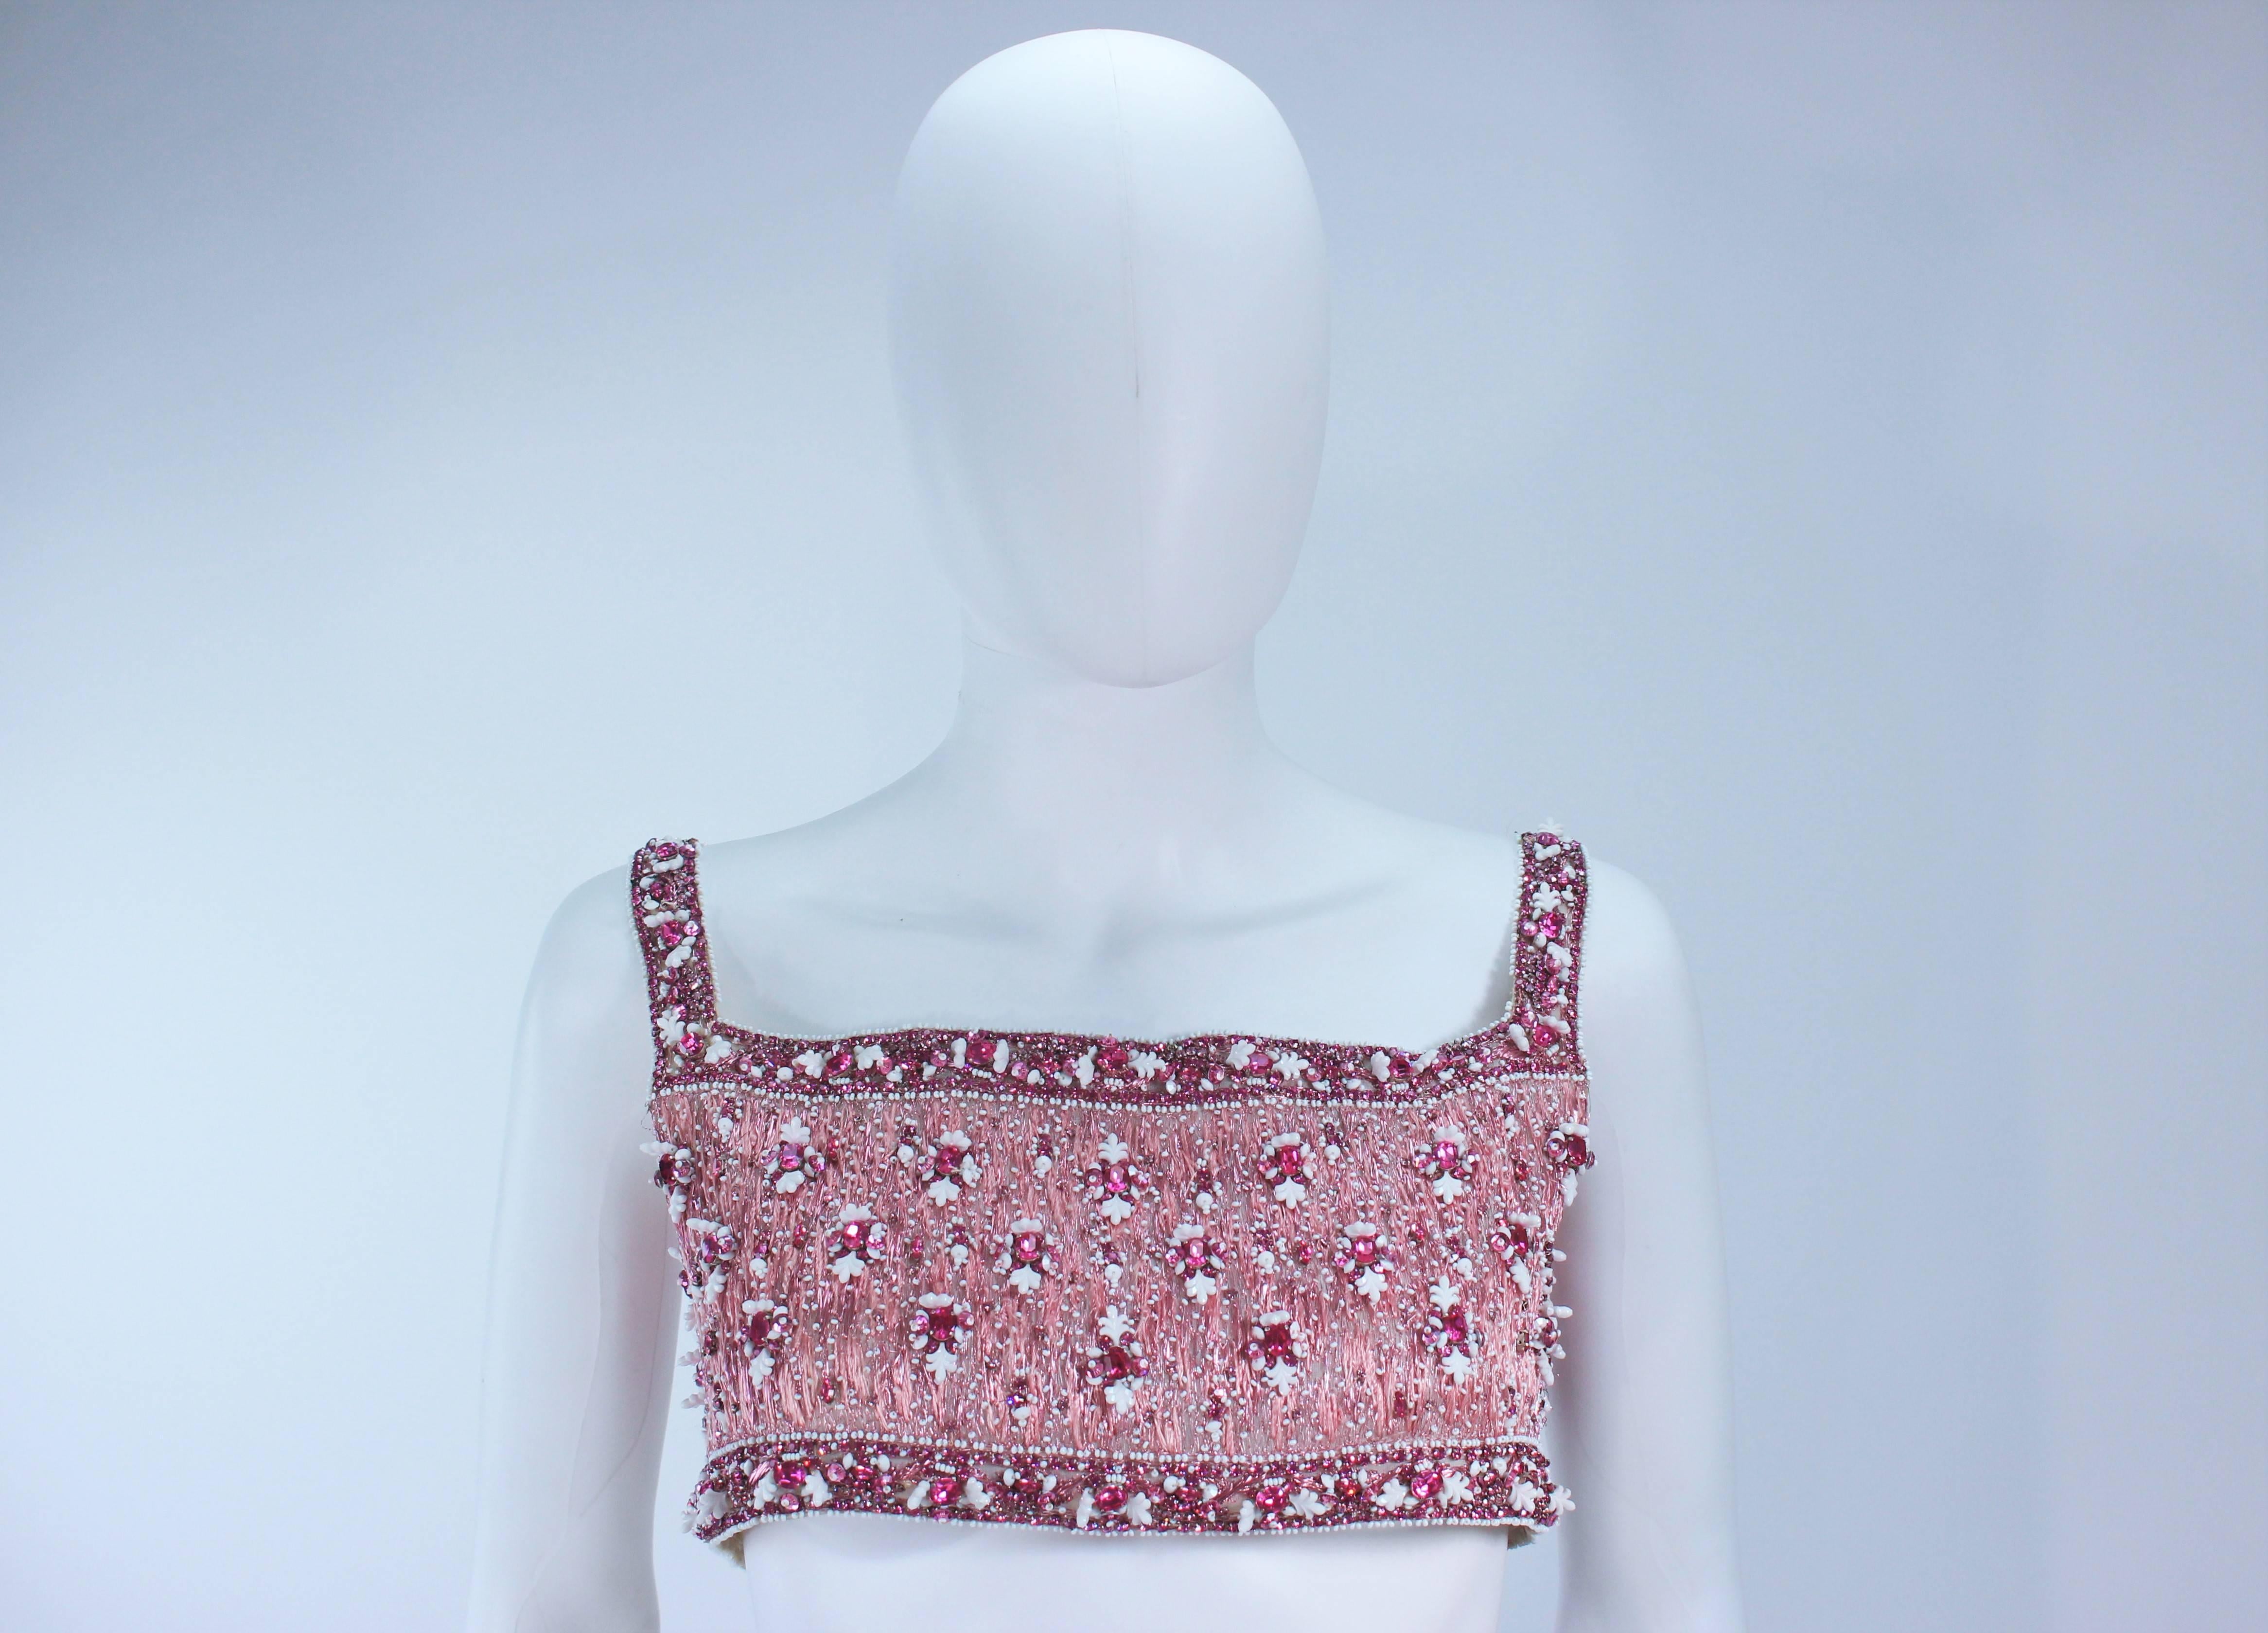 GIVENCHY HAUTE COUTURE Lesage Paris Betsy Bloomingdale Hand Beaded 1960s Gown 0  For Sale 1